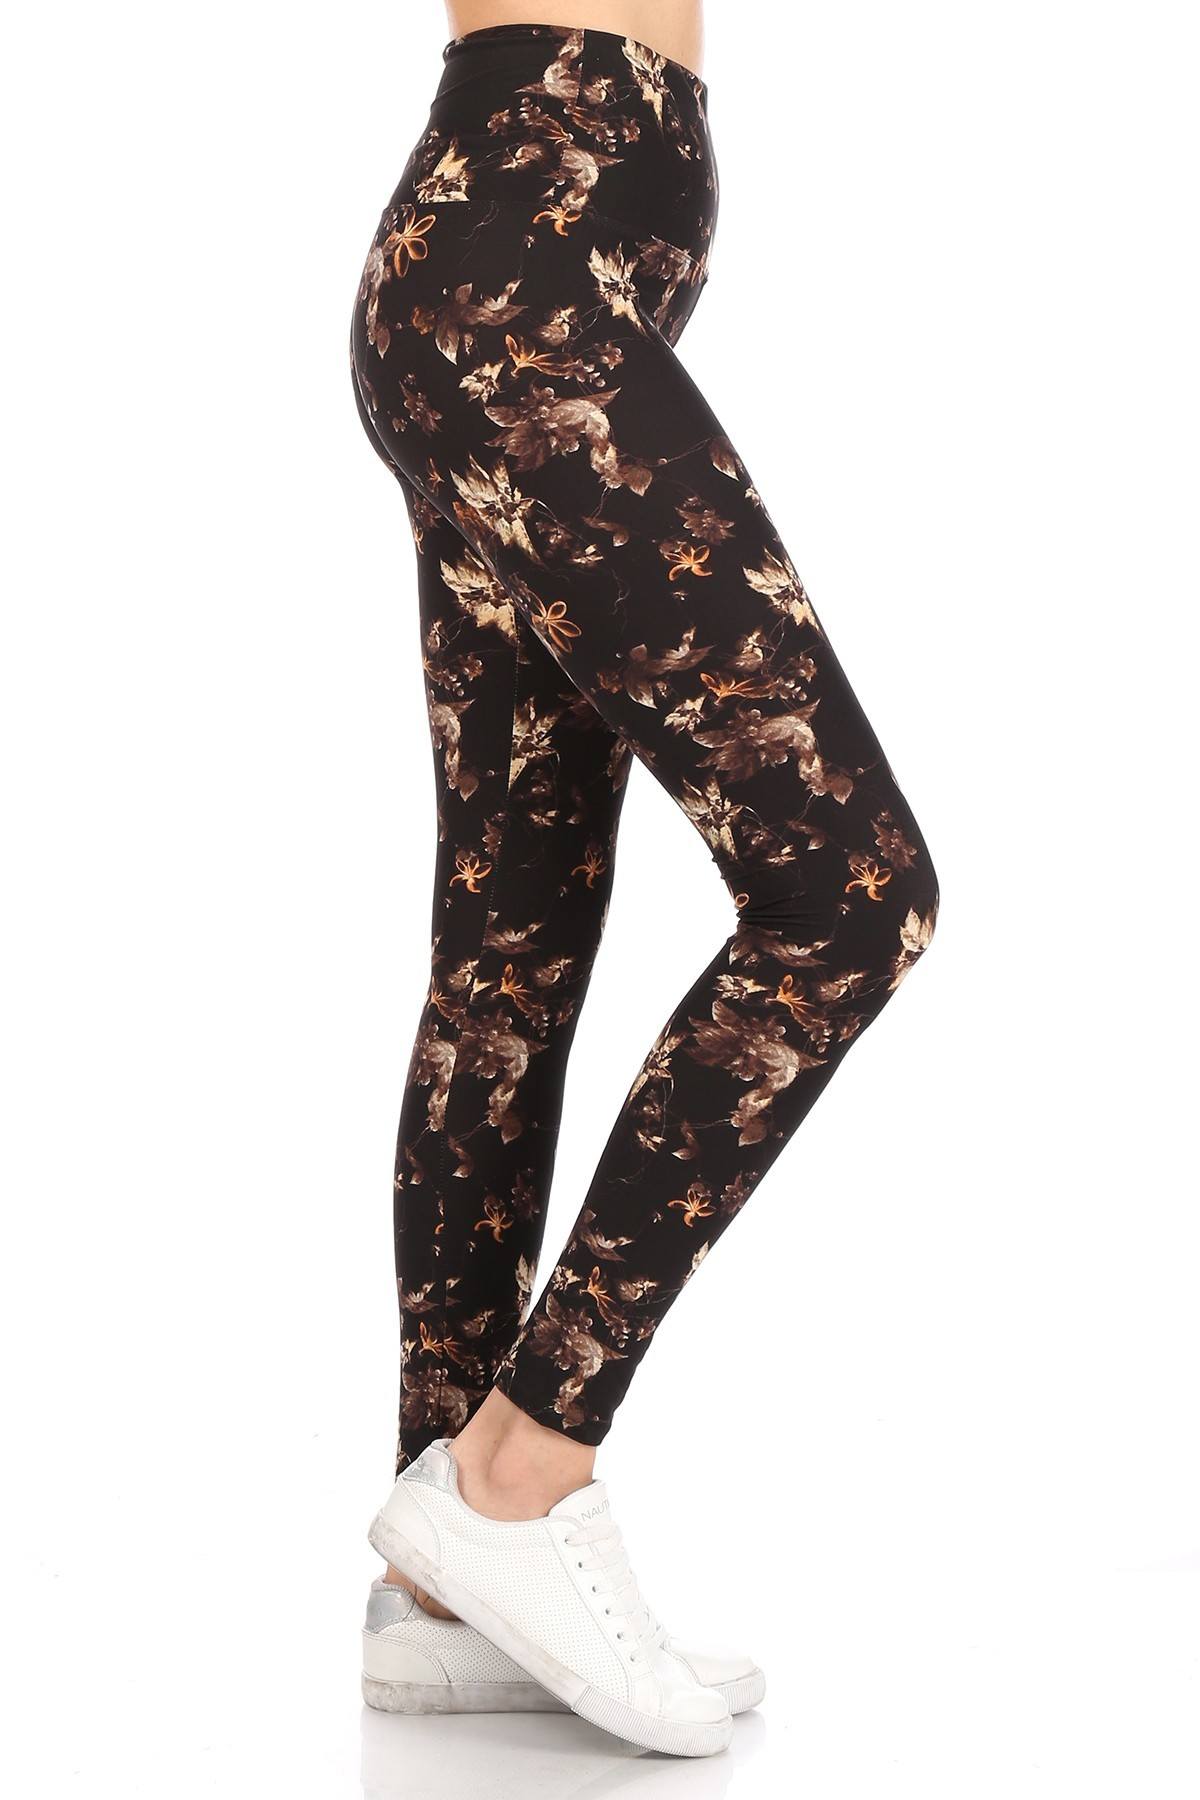 5-inch Long Yoga Style Banded Lined Multi Printed Knit Legging With High Waist - Black